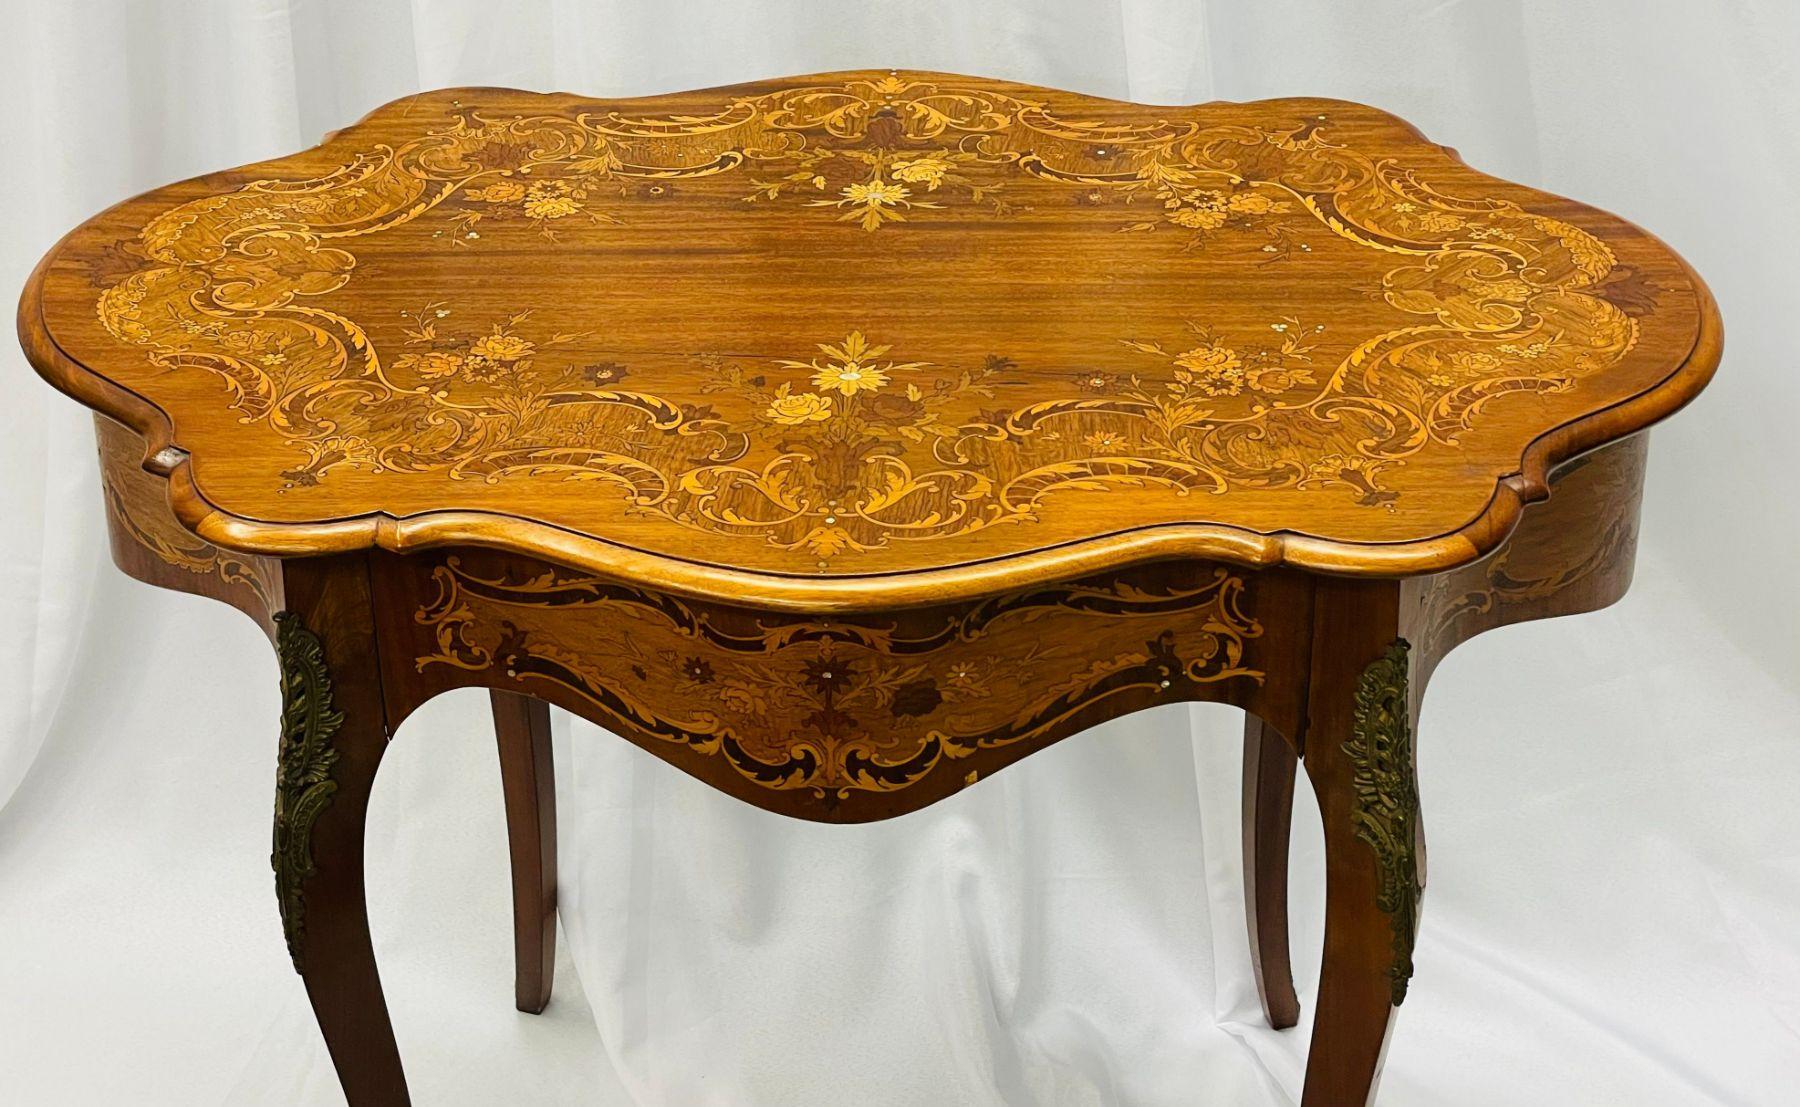 A French satinwood and walnut inlaid accent or center table. This Louis XV Style table having satinwood inlays with mother of pearl details over a large floral design depicting roses and tulips.

Satinwood, Walnut
France, 1930s.